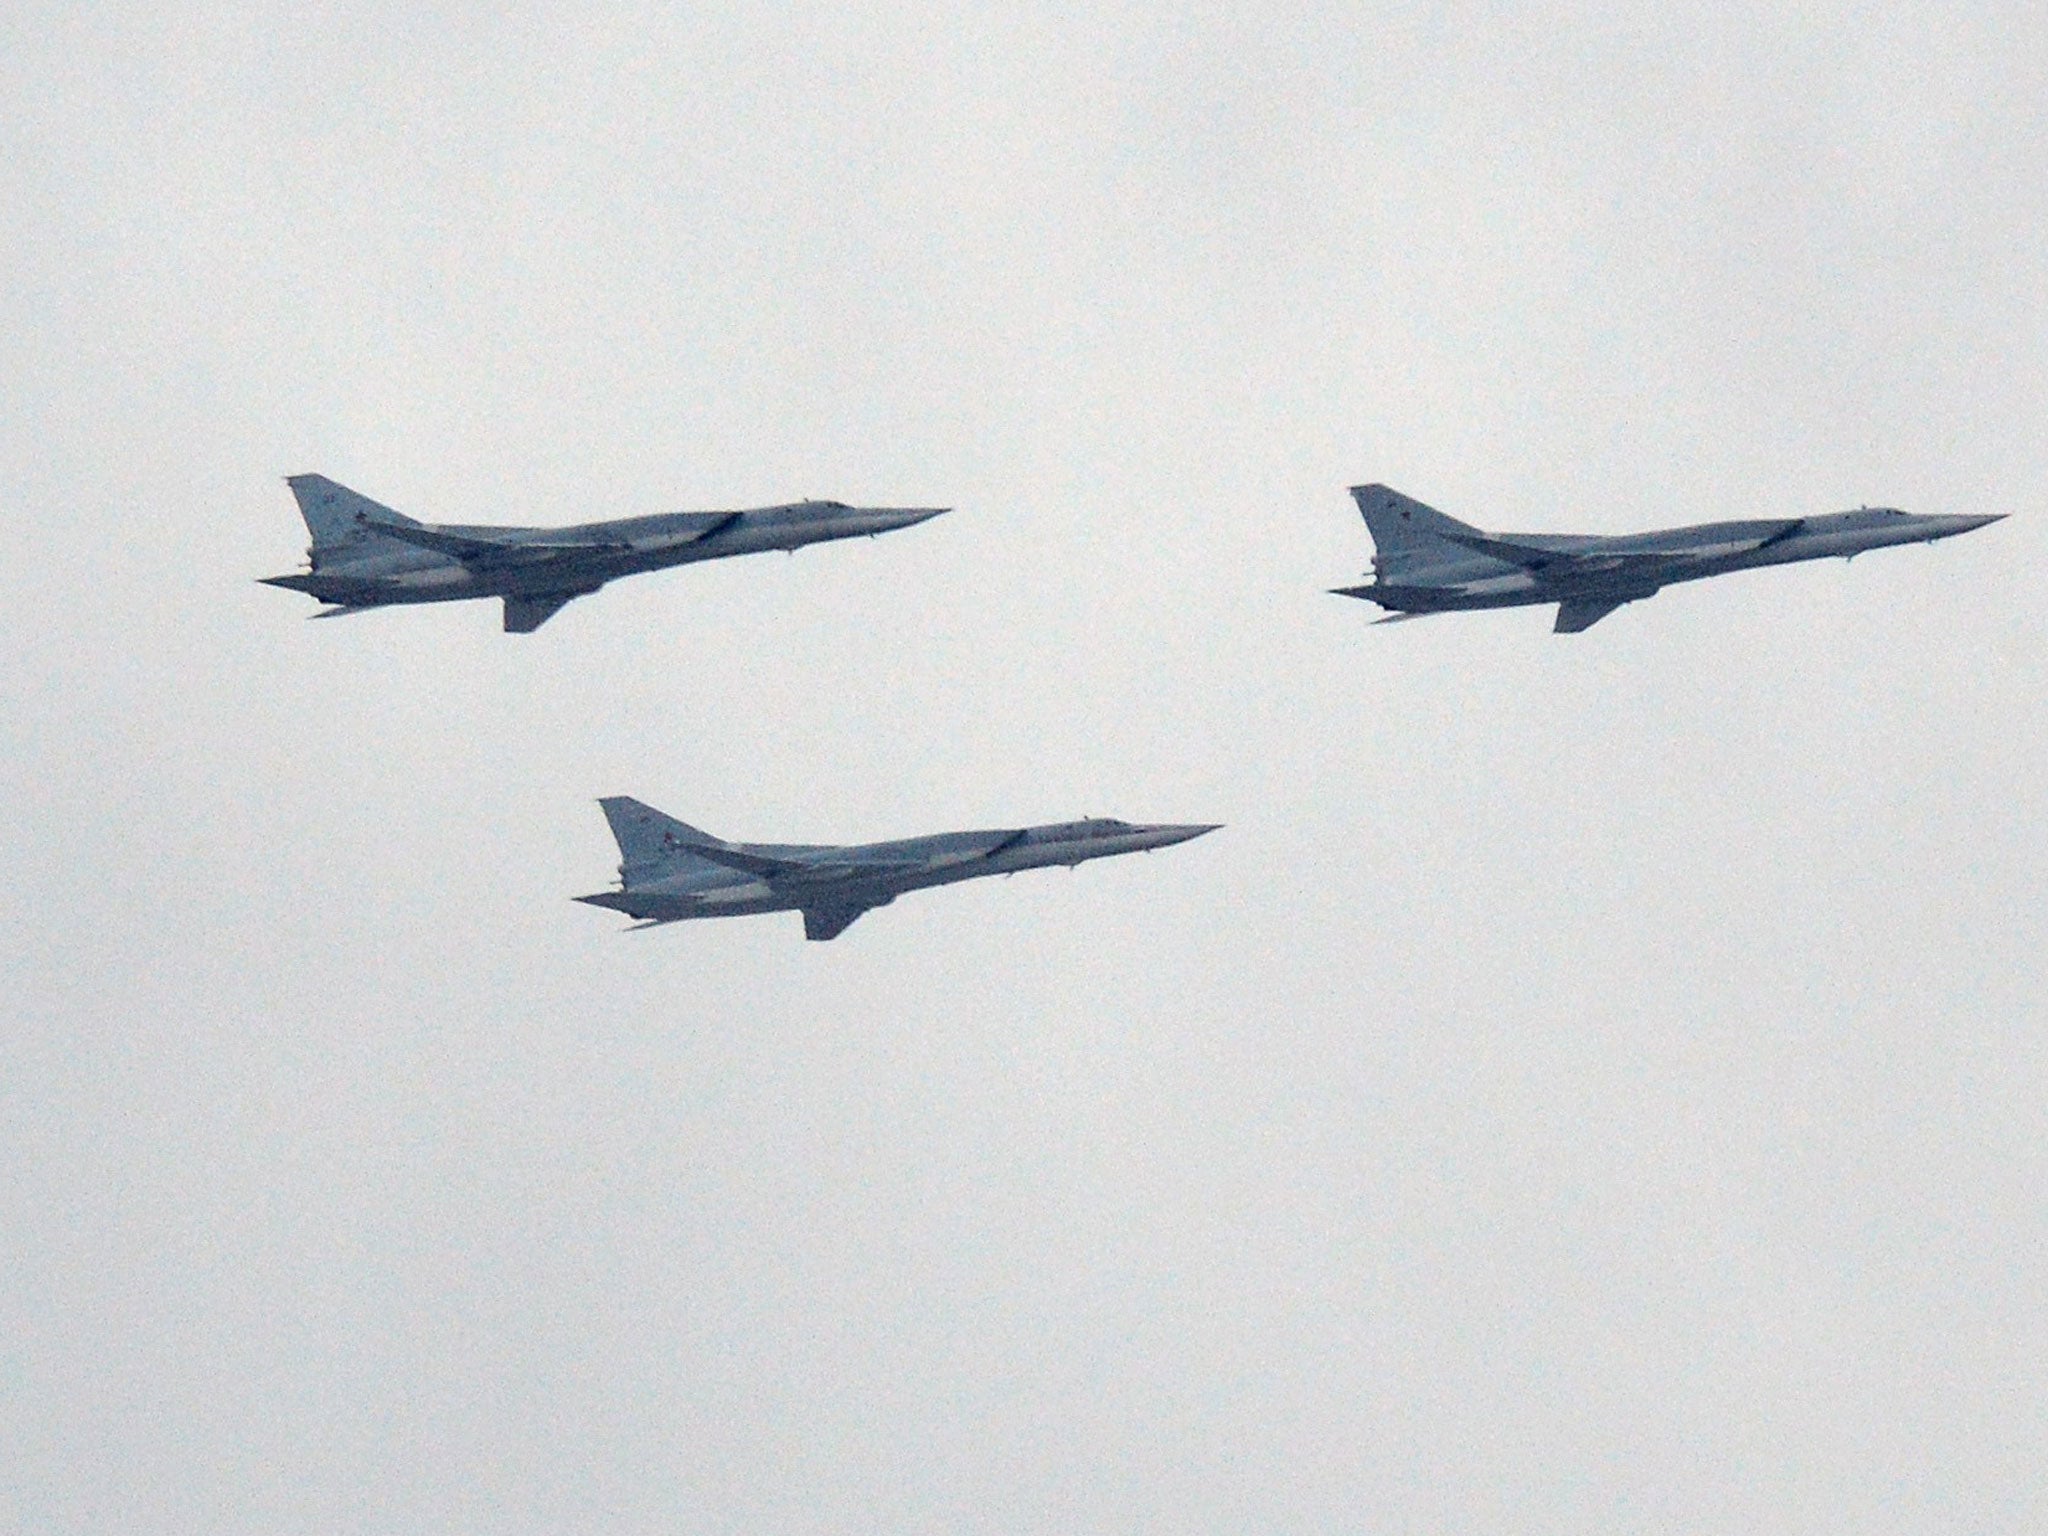 Russian Tupolev Tu-22M supersonic strategic bombers fly above the Kremlin's cathedrals in Moscow, on May 7, 2014, during a rehearsal of the Victory Day parade